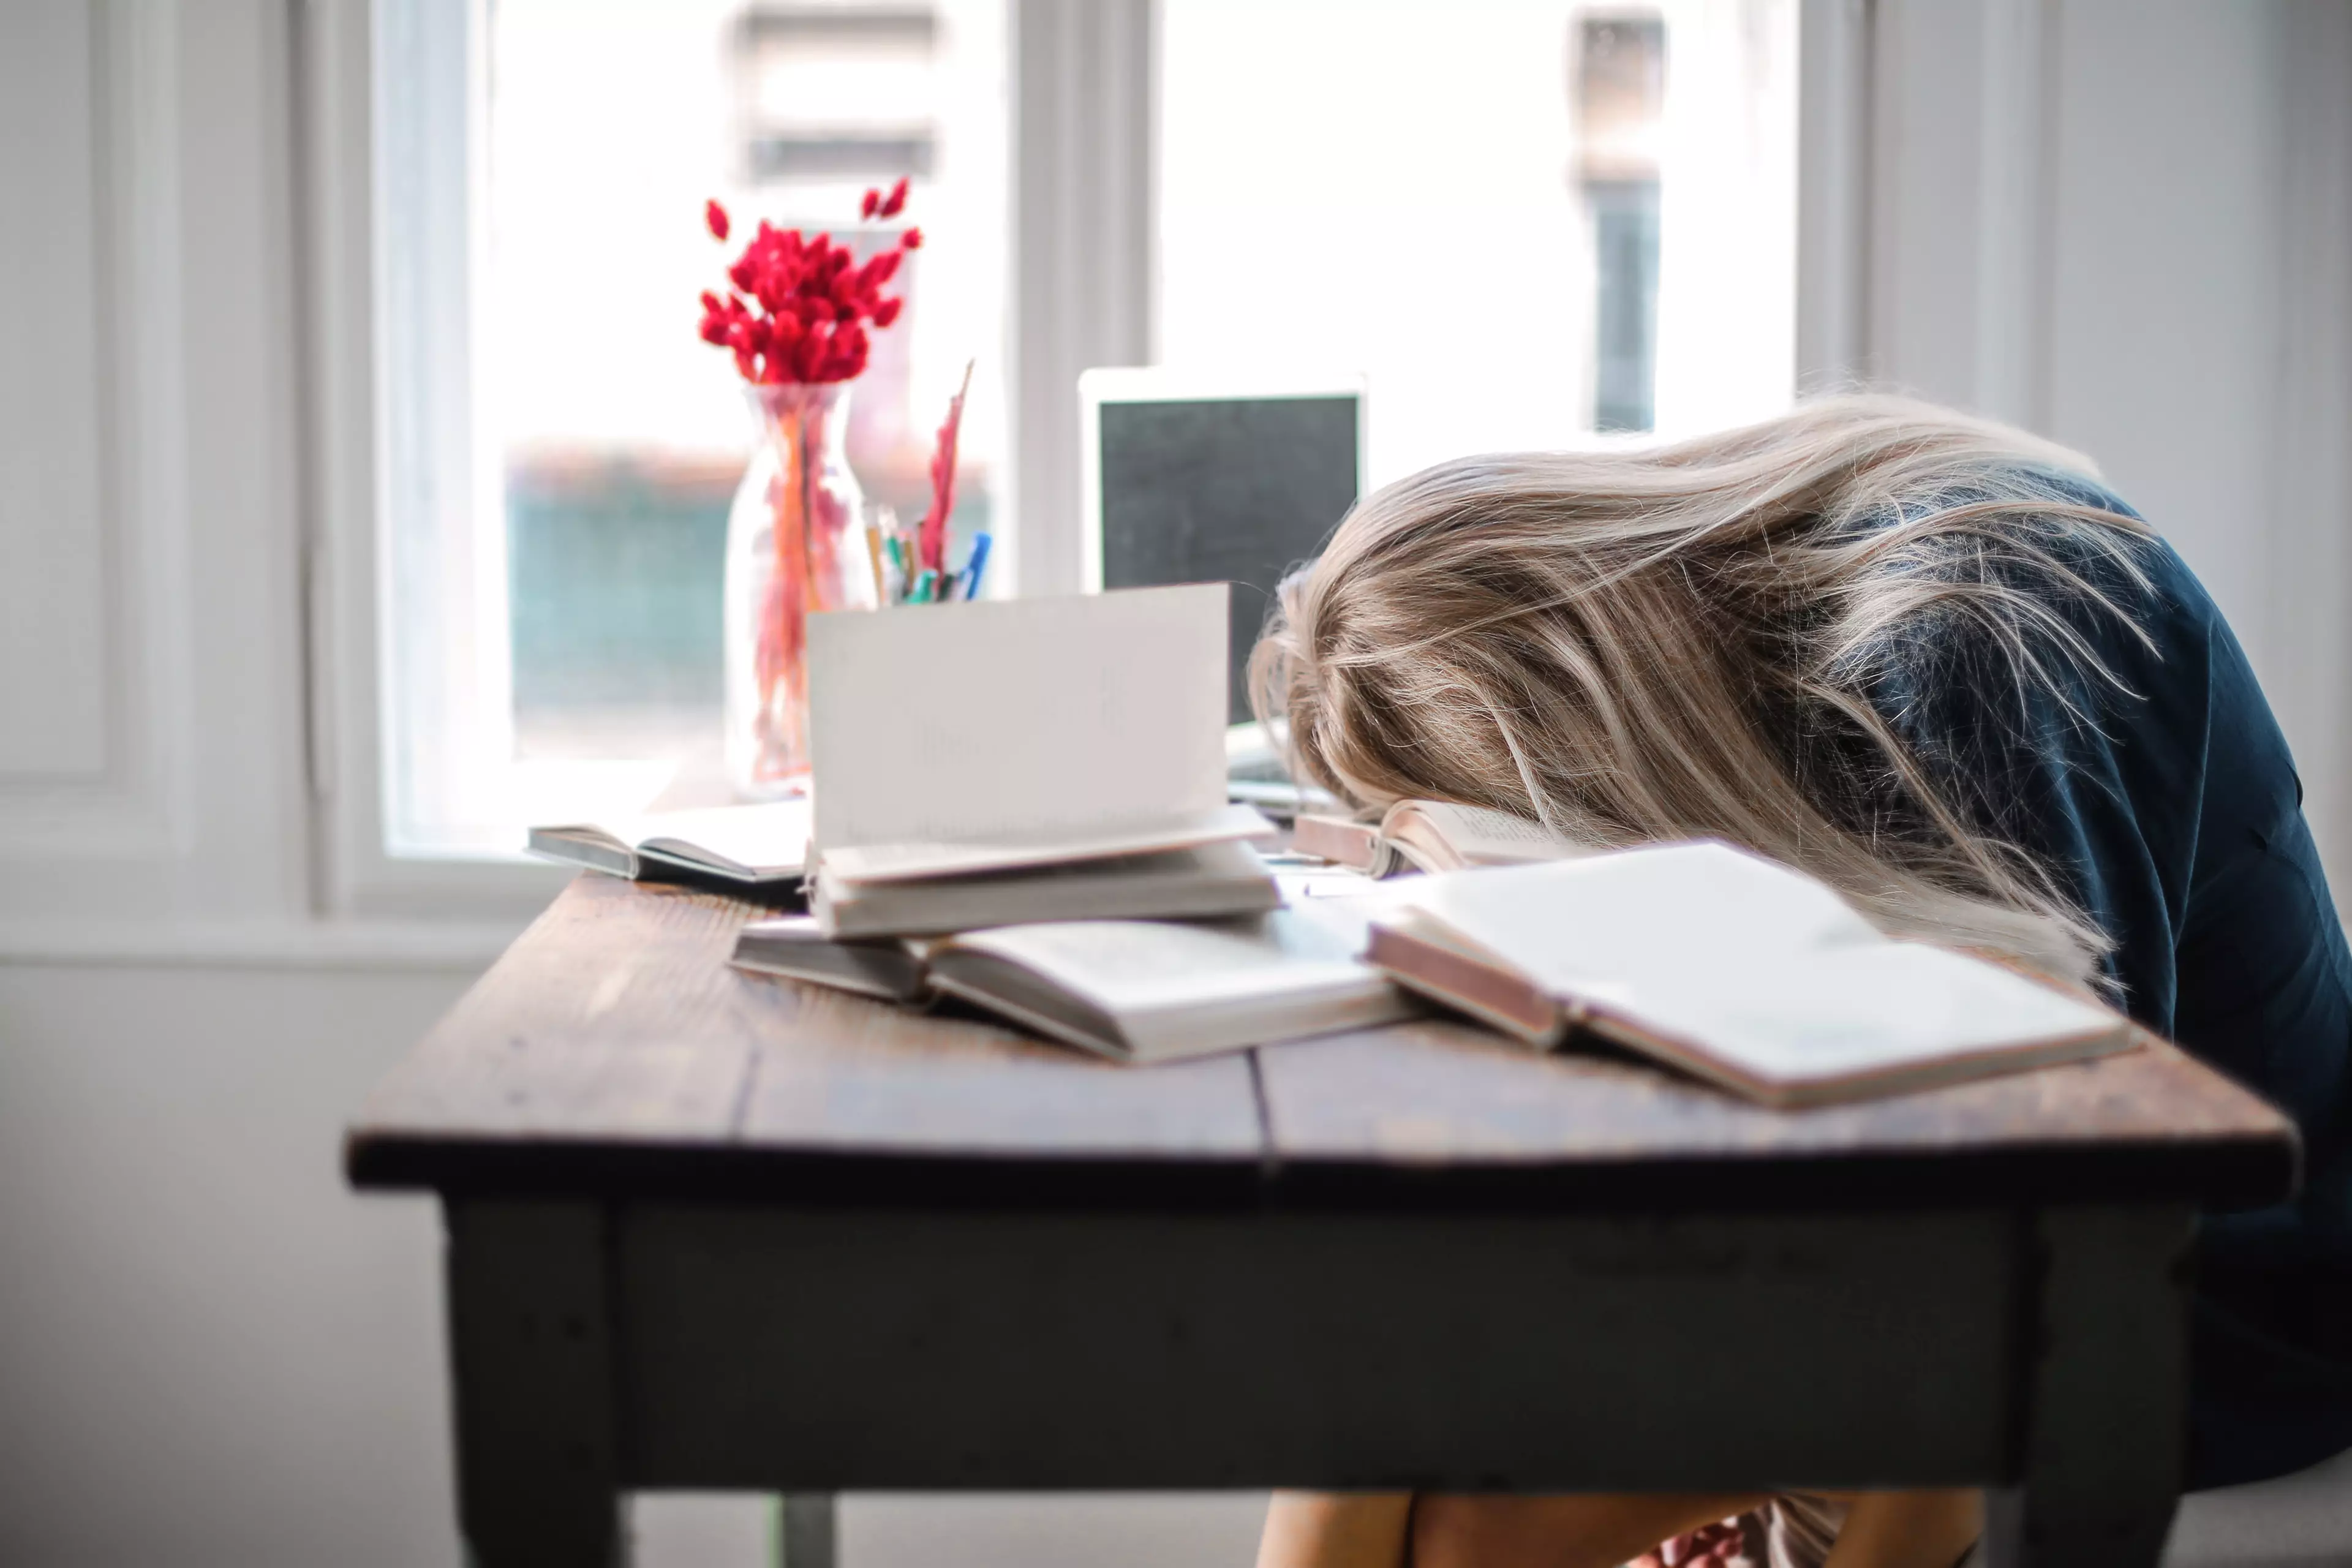 Over half of those polled said they'd take a pay cut at work if they could take a nap at their desks (